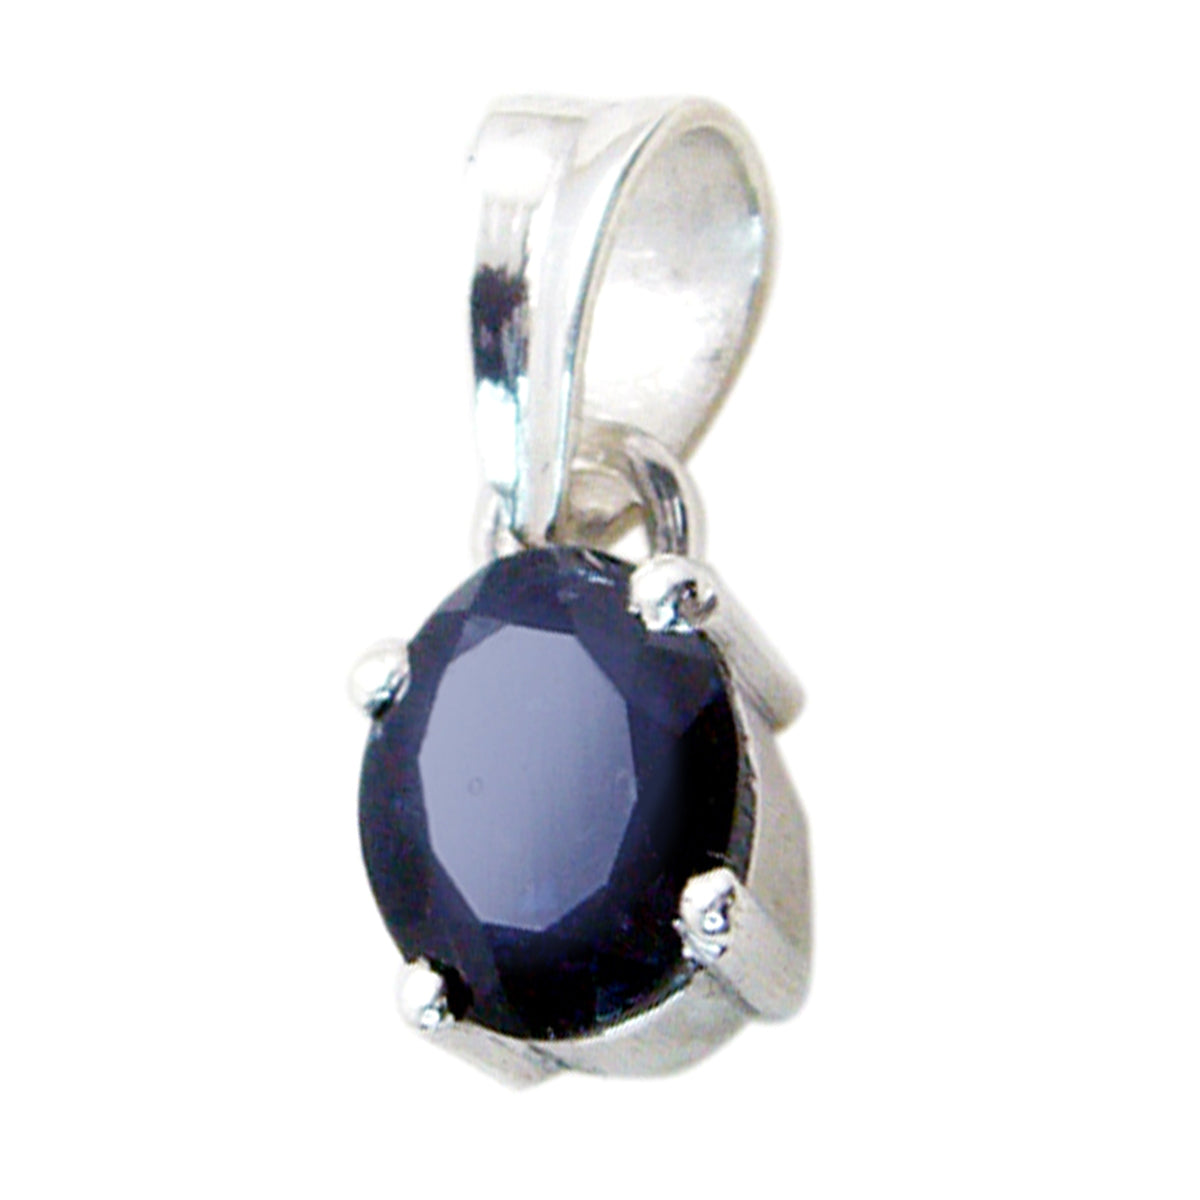 Riyo Heavenly Gems Oval Faceted Blue Iolite Silver Pendant Gift For Boxing Day